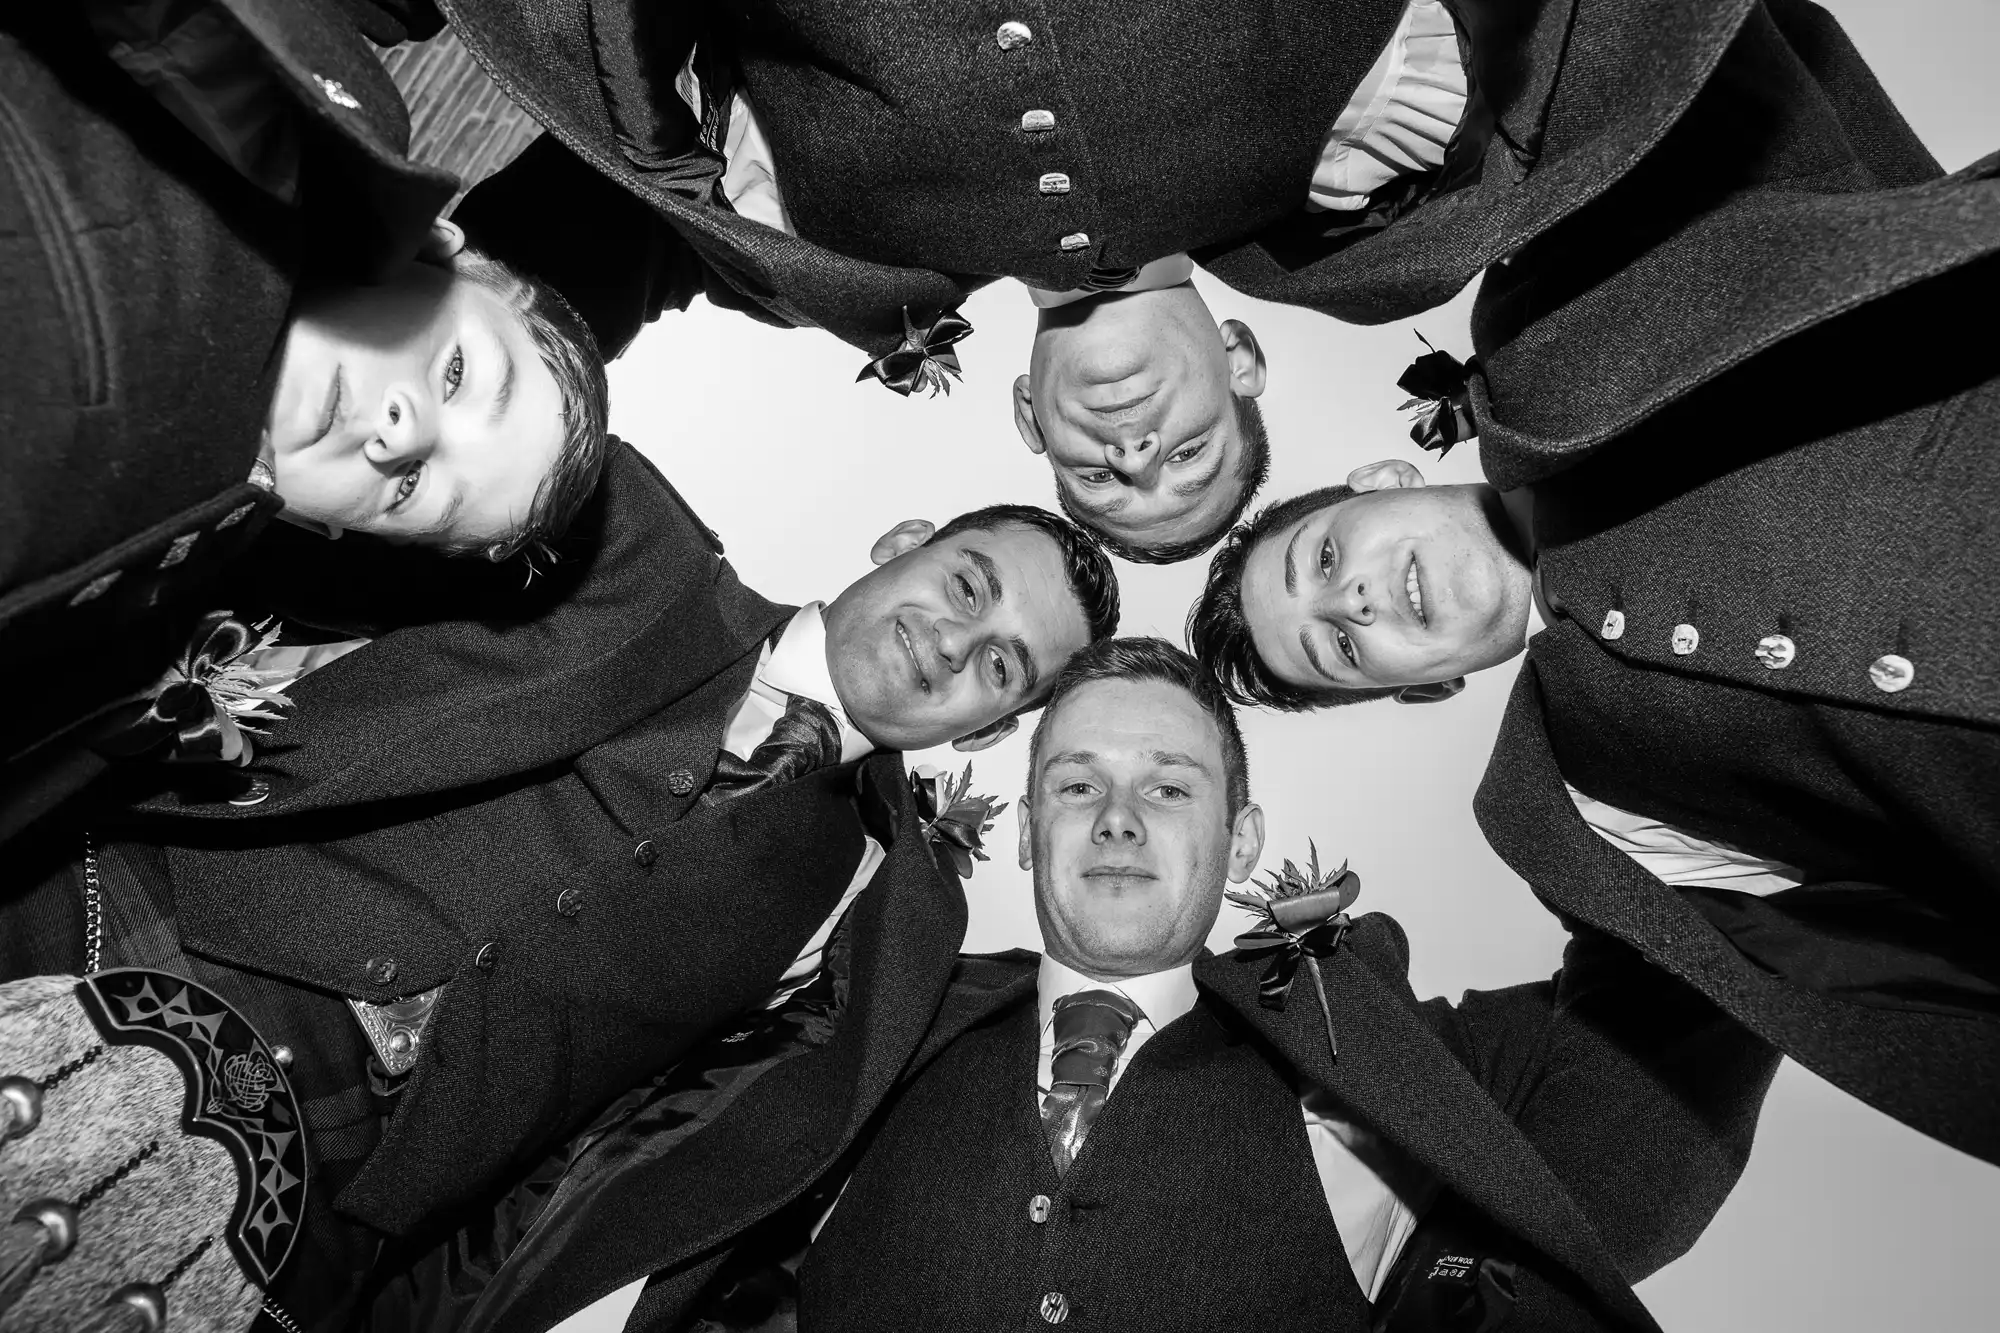 Five men in traditional suits with boutonnieres, viewed from below, forming a circle and looking down towards the camera.